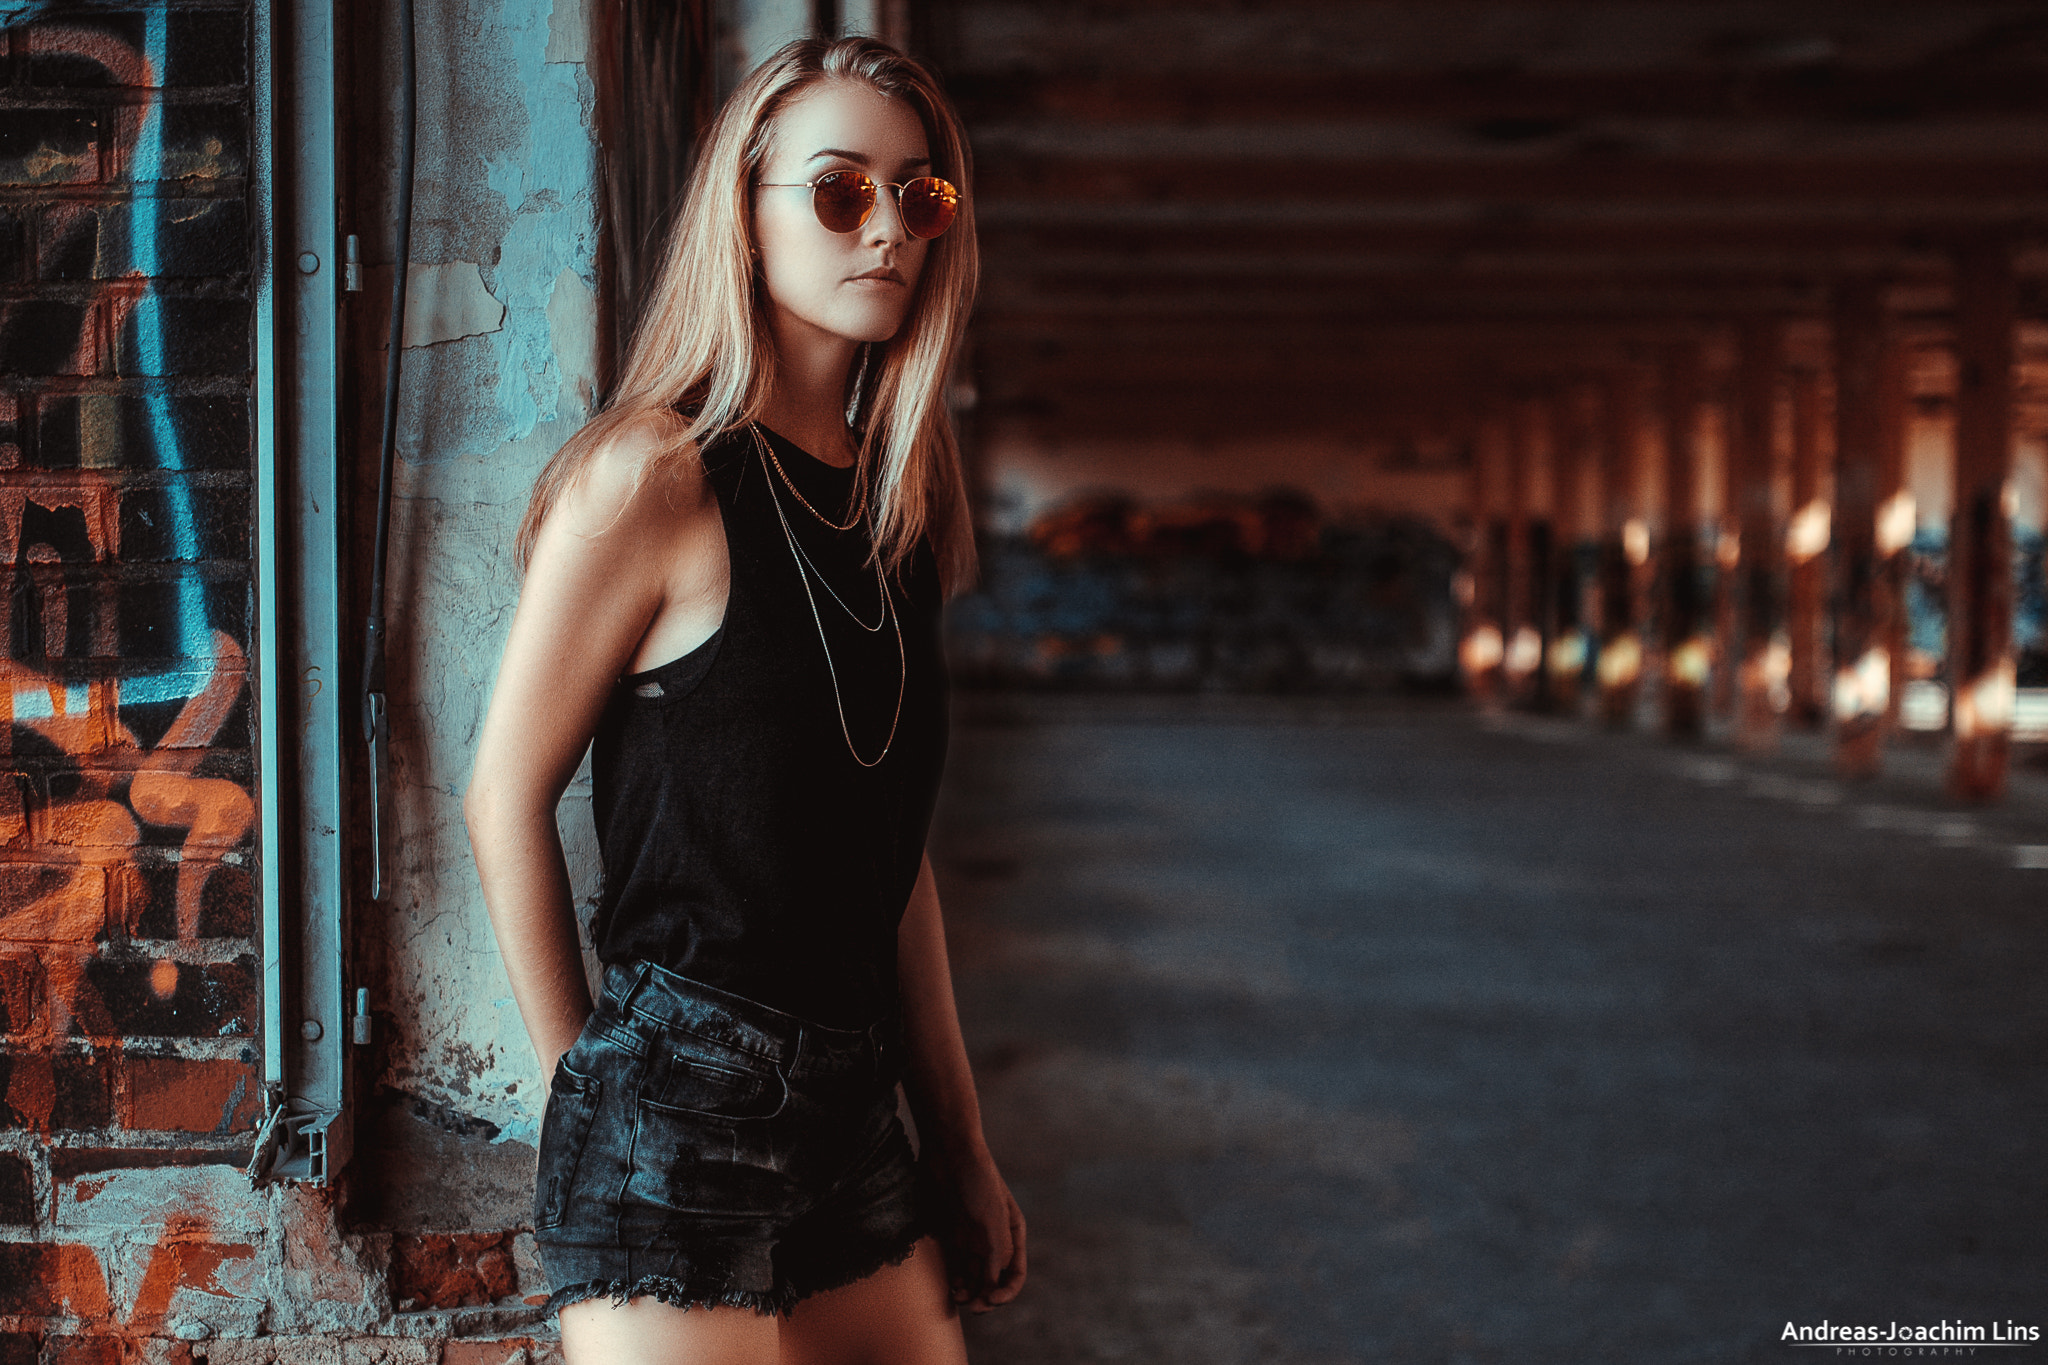 People 2048x1365 women Andreas-Joachim Lins women with glasses brunette jean shorts portrait sunglasses ruins abandoned women outdoors urban women with shades long hair black top watermarked